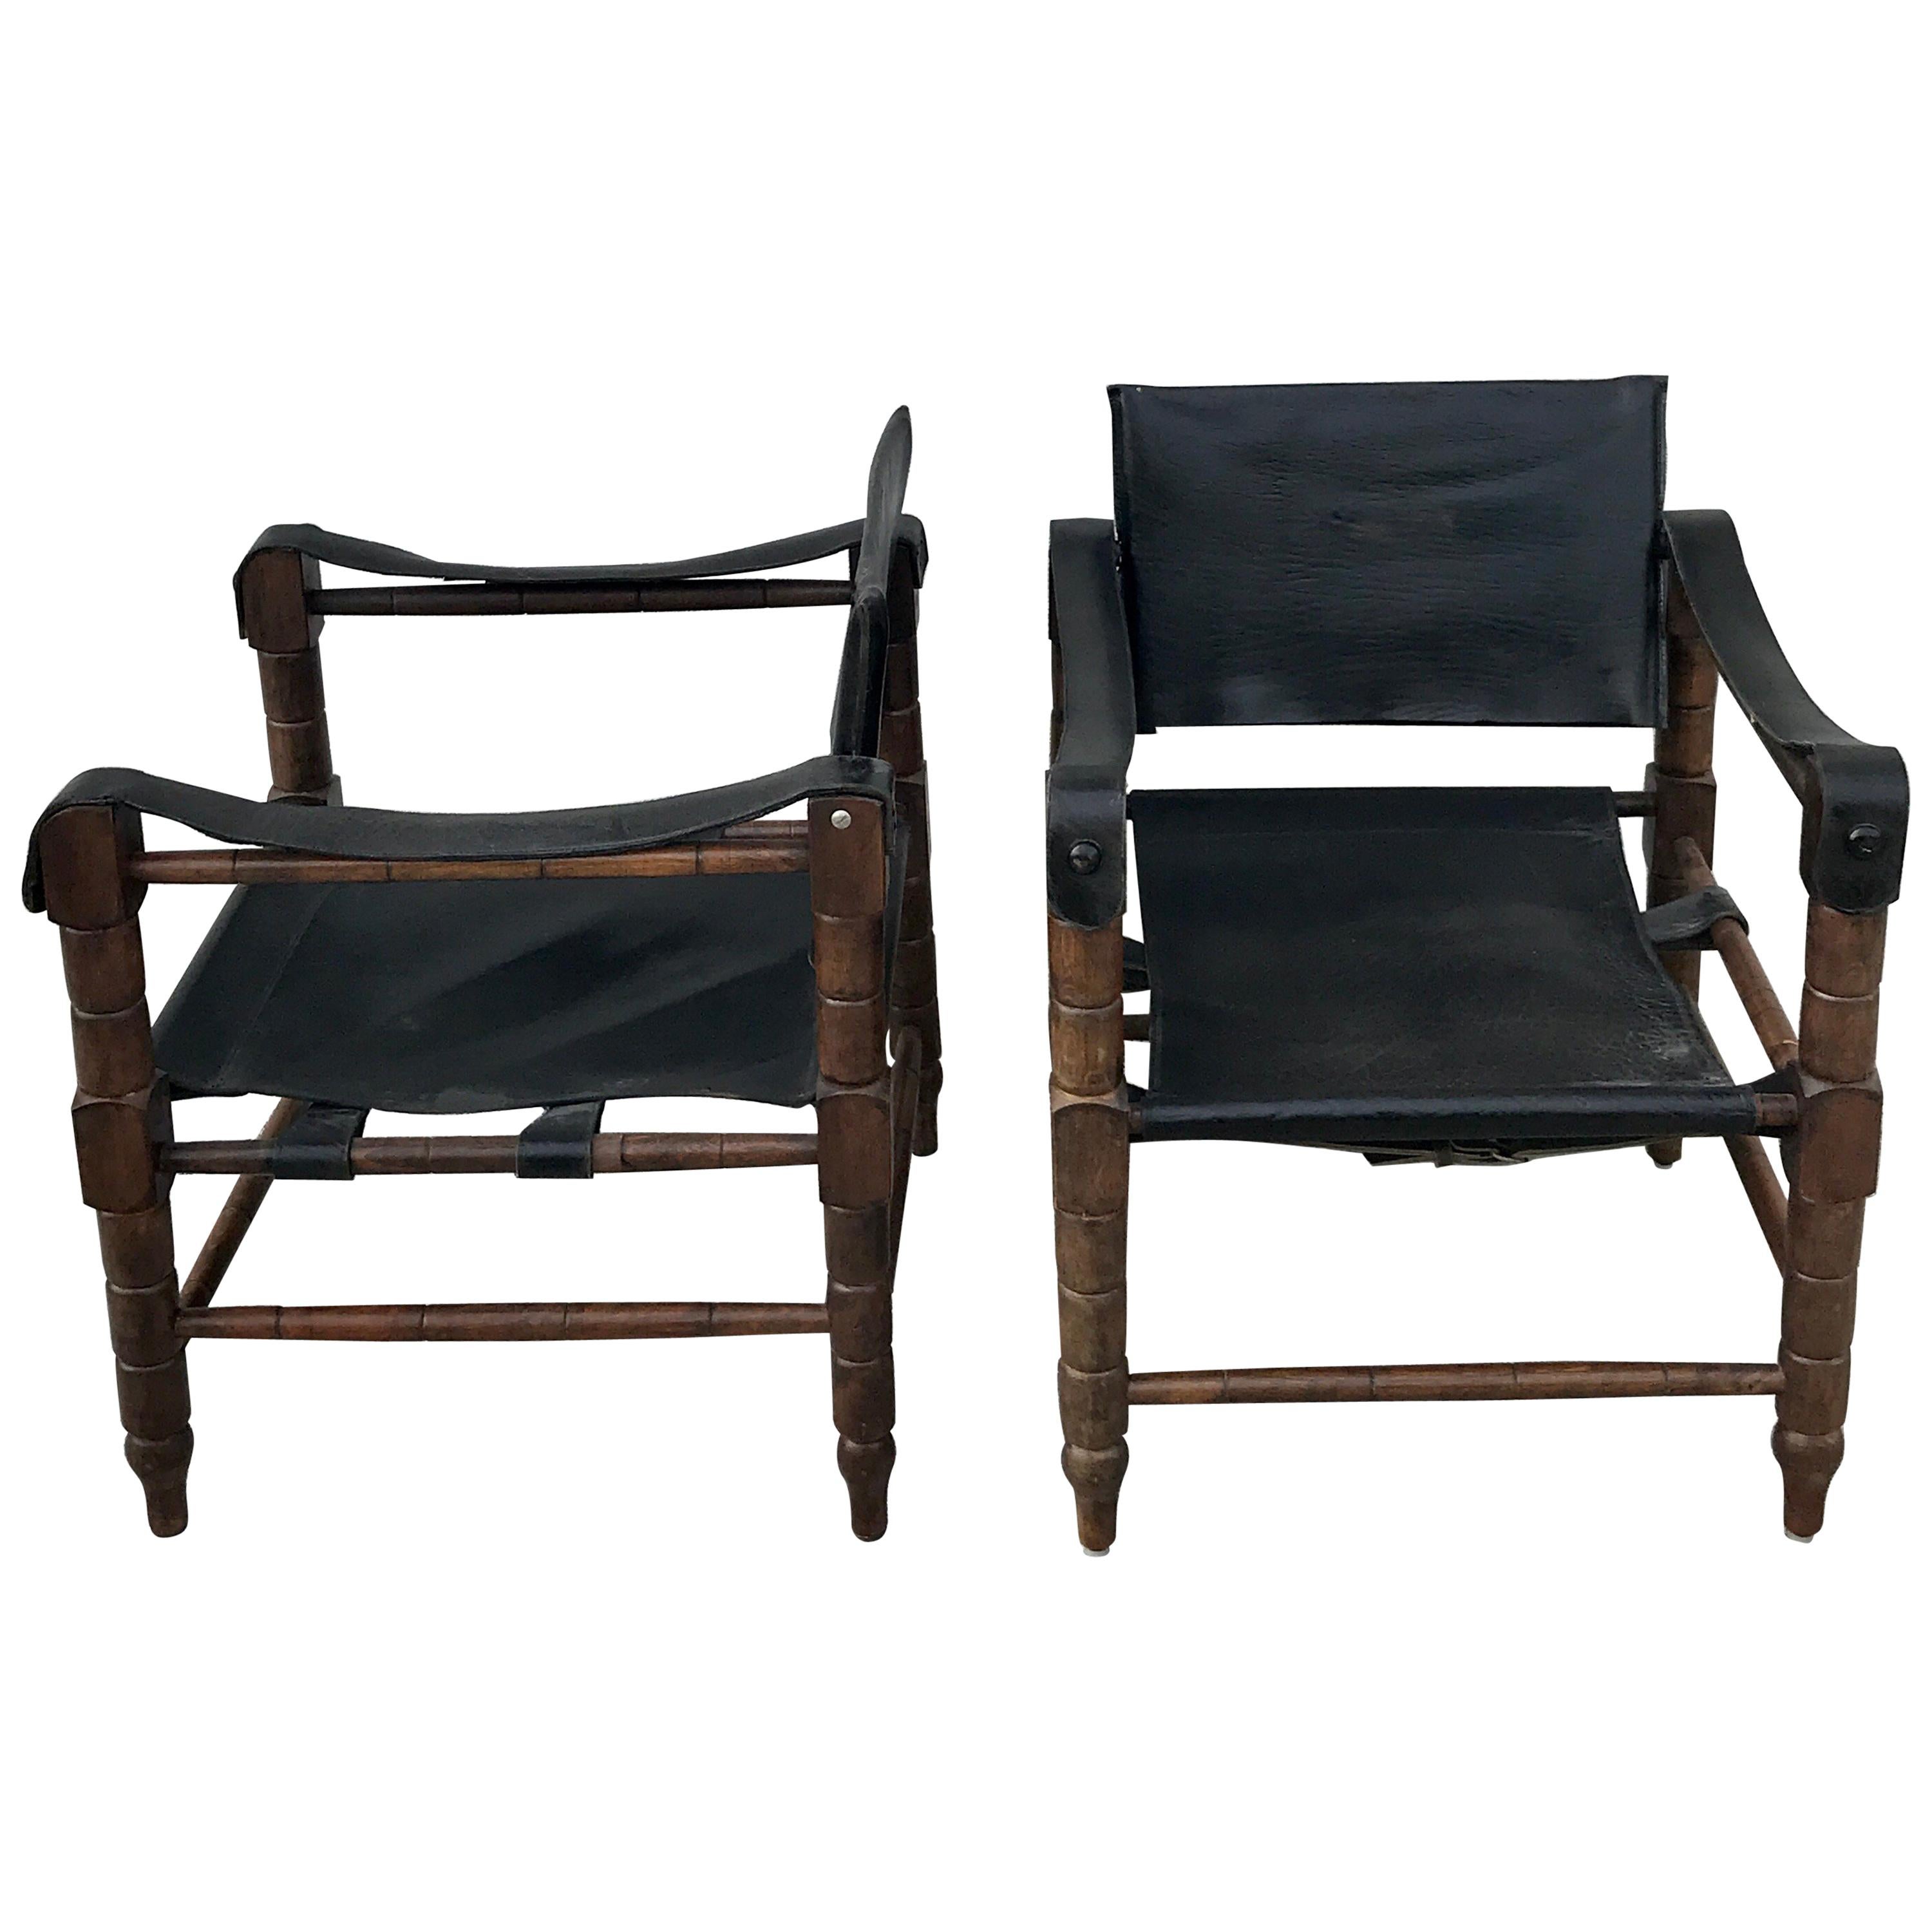 Pair of Syrian Leather Campaign / Safari Chairs